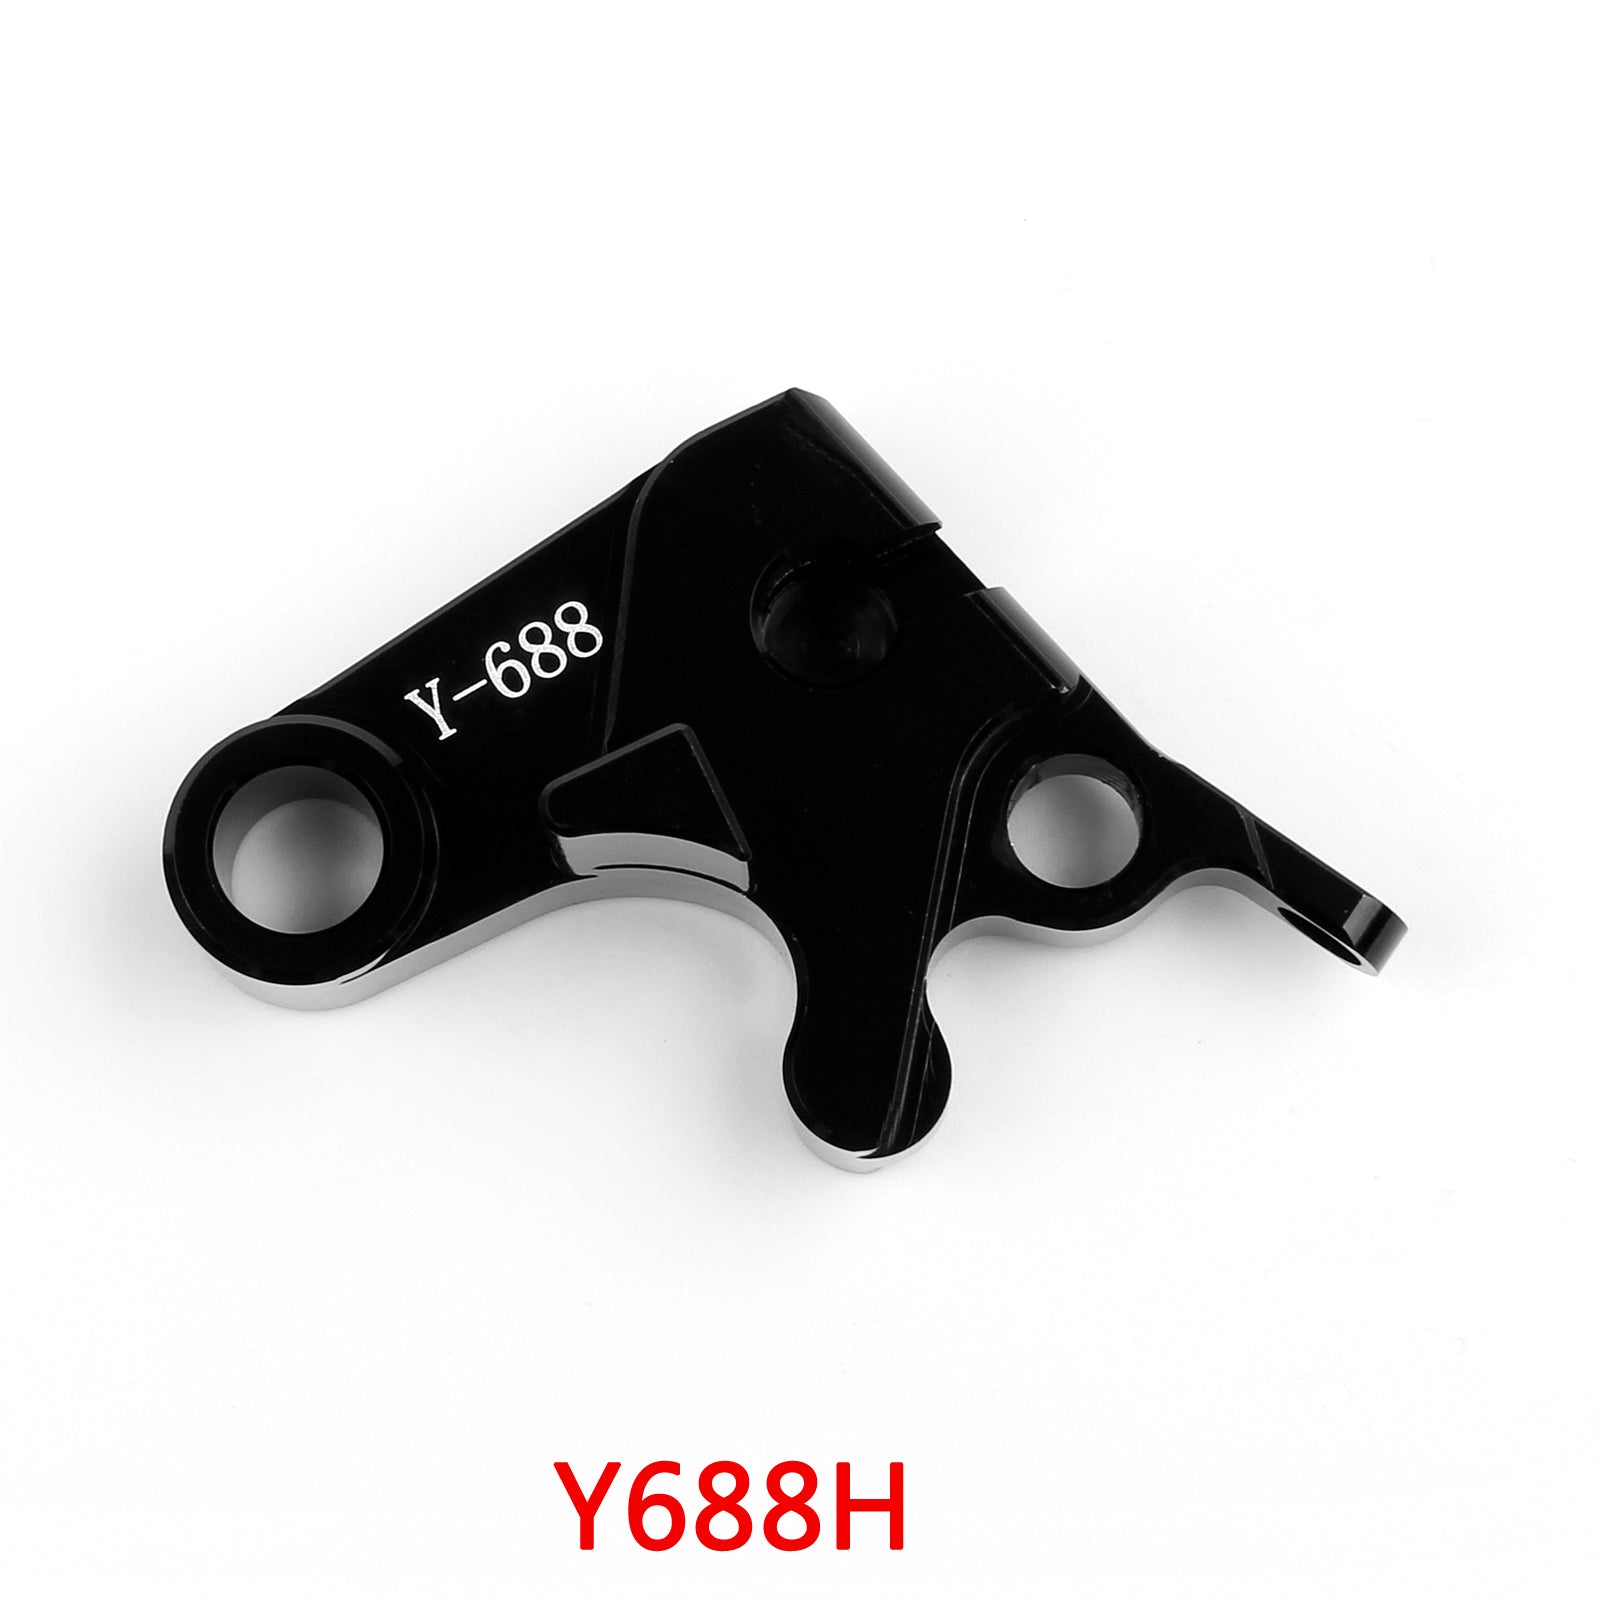 NEW Short Clutch Brake Lever fit for Yamaha YZF R1 R1S R6  MT-09/SP Tracer